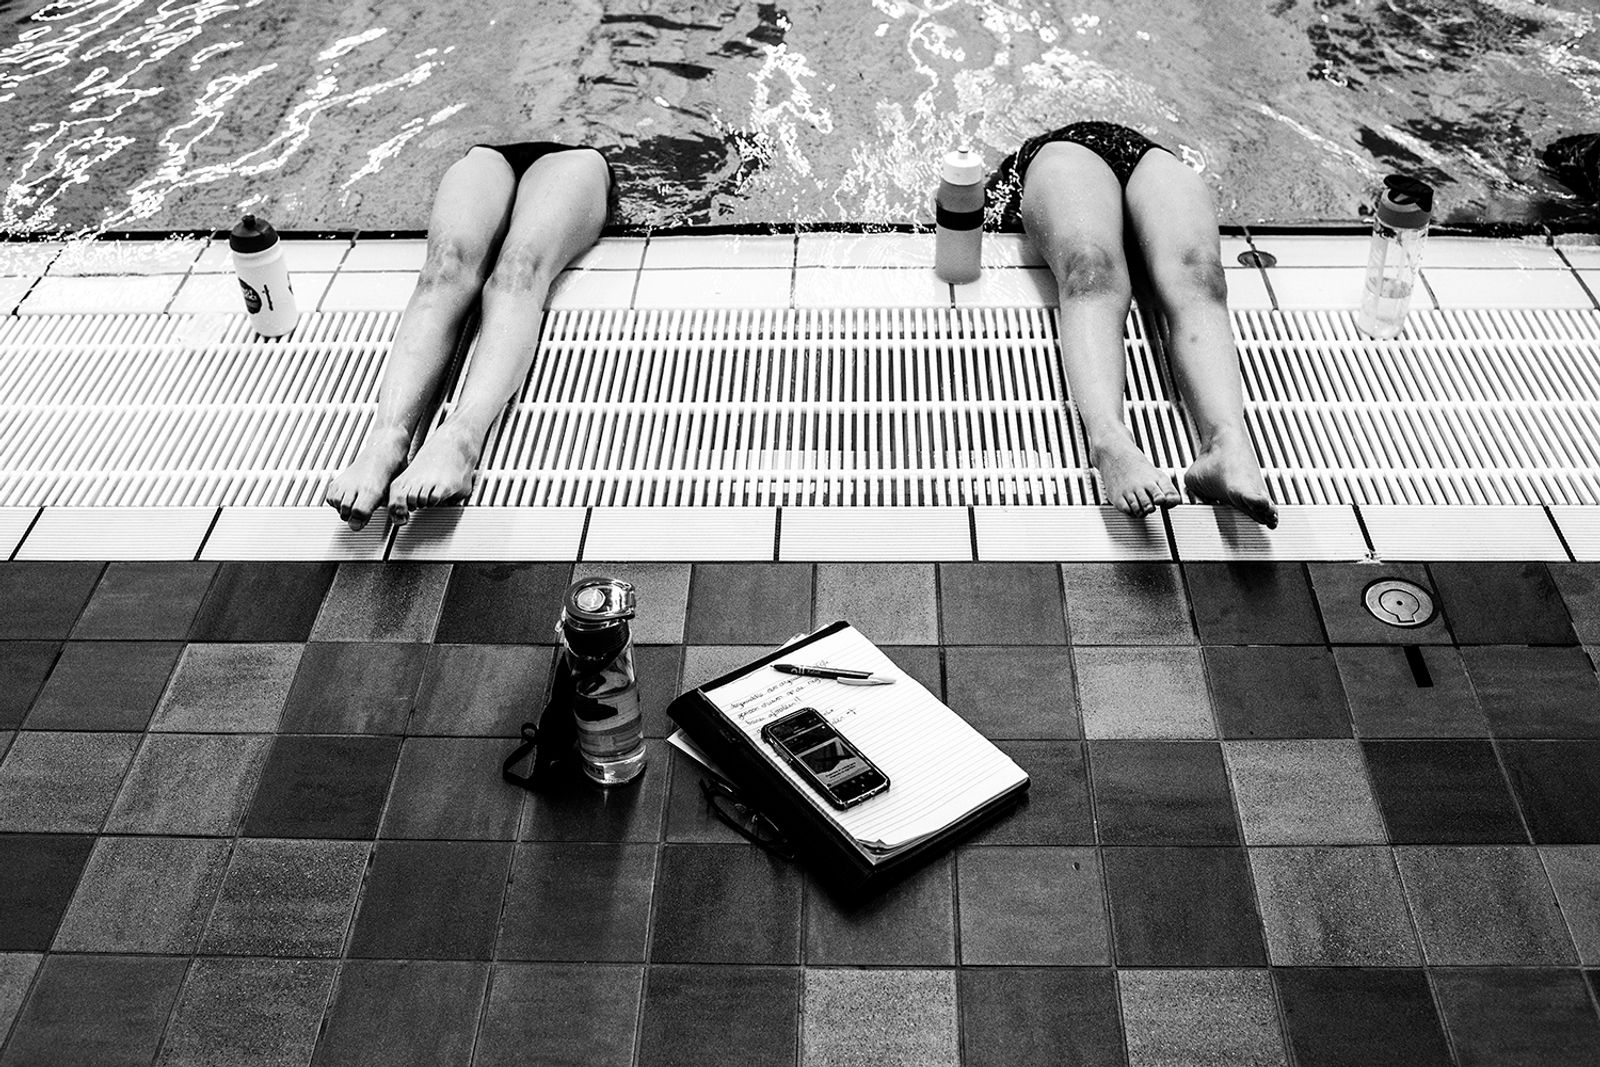 © Carla Kogelman - Image from the SYNC SWIM photography project